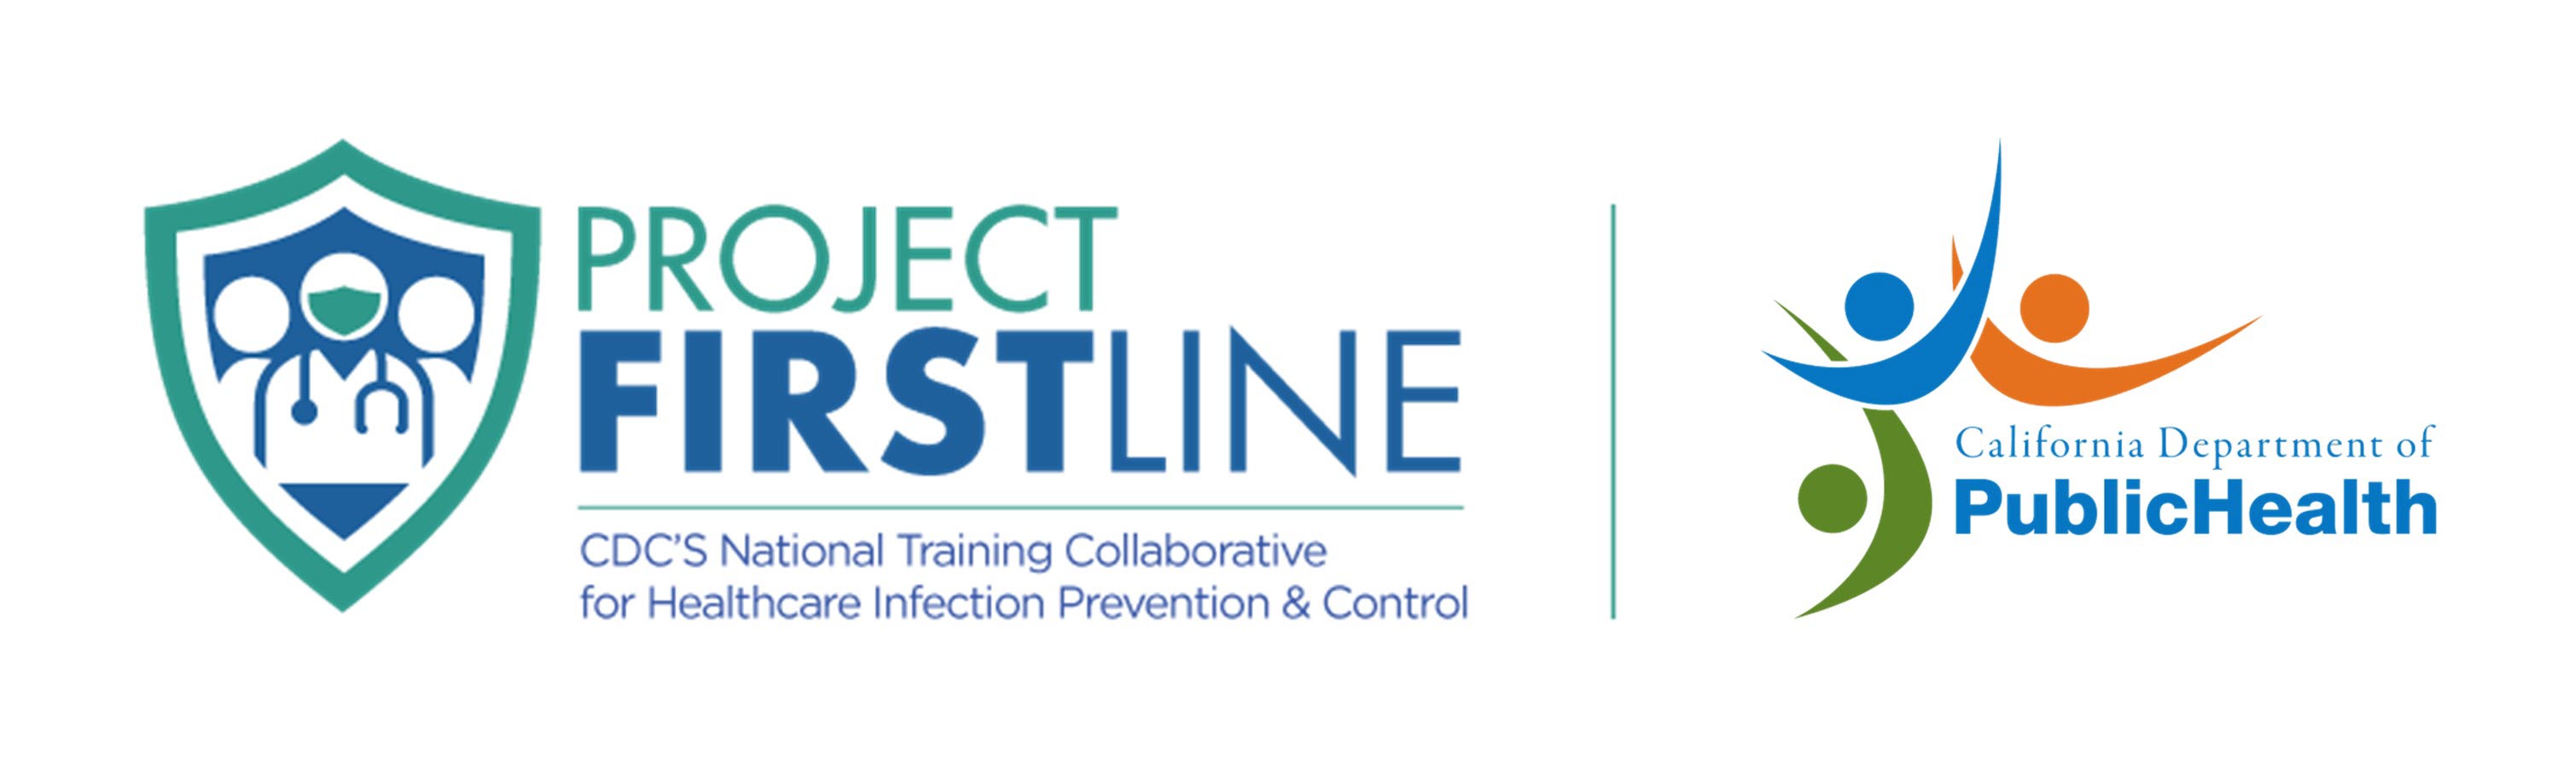 Project Firsline and CDPH logos